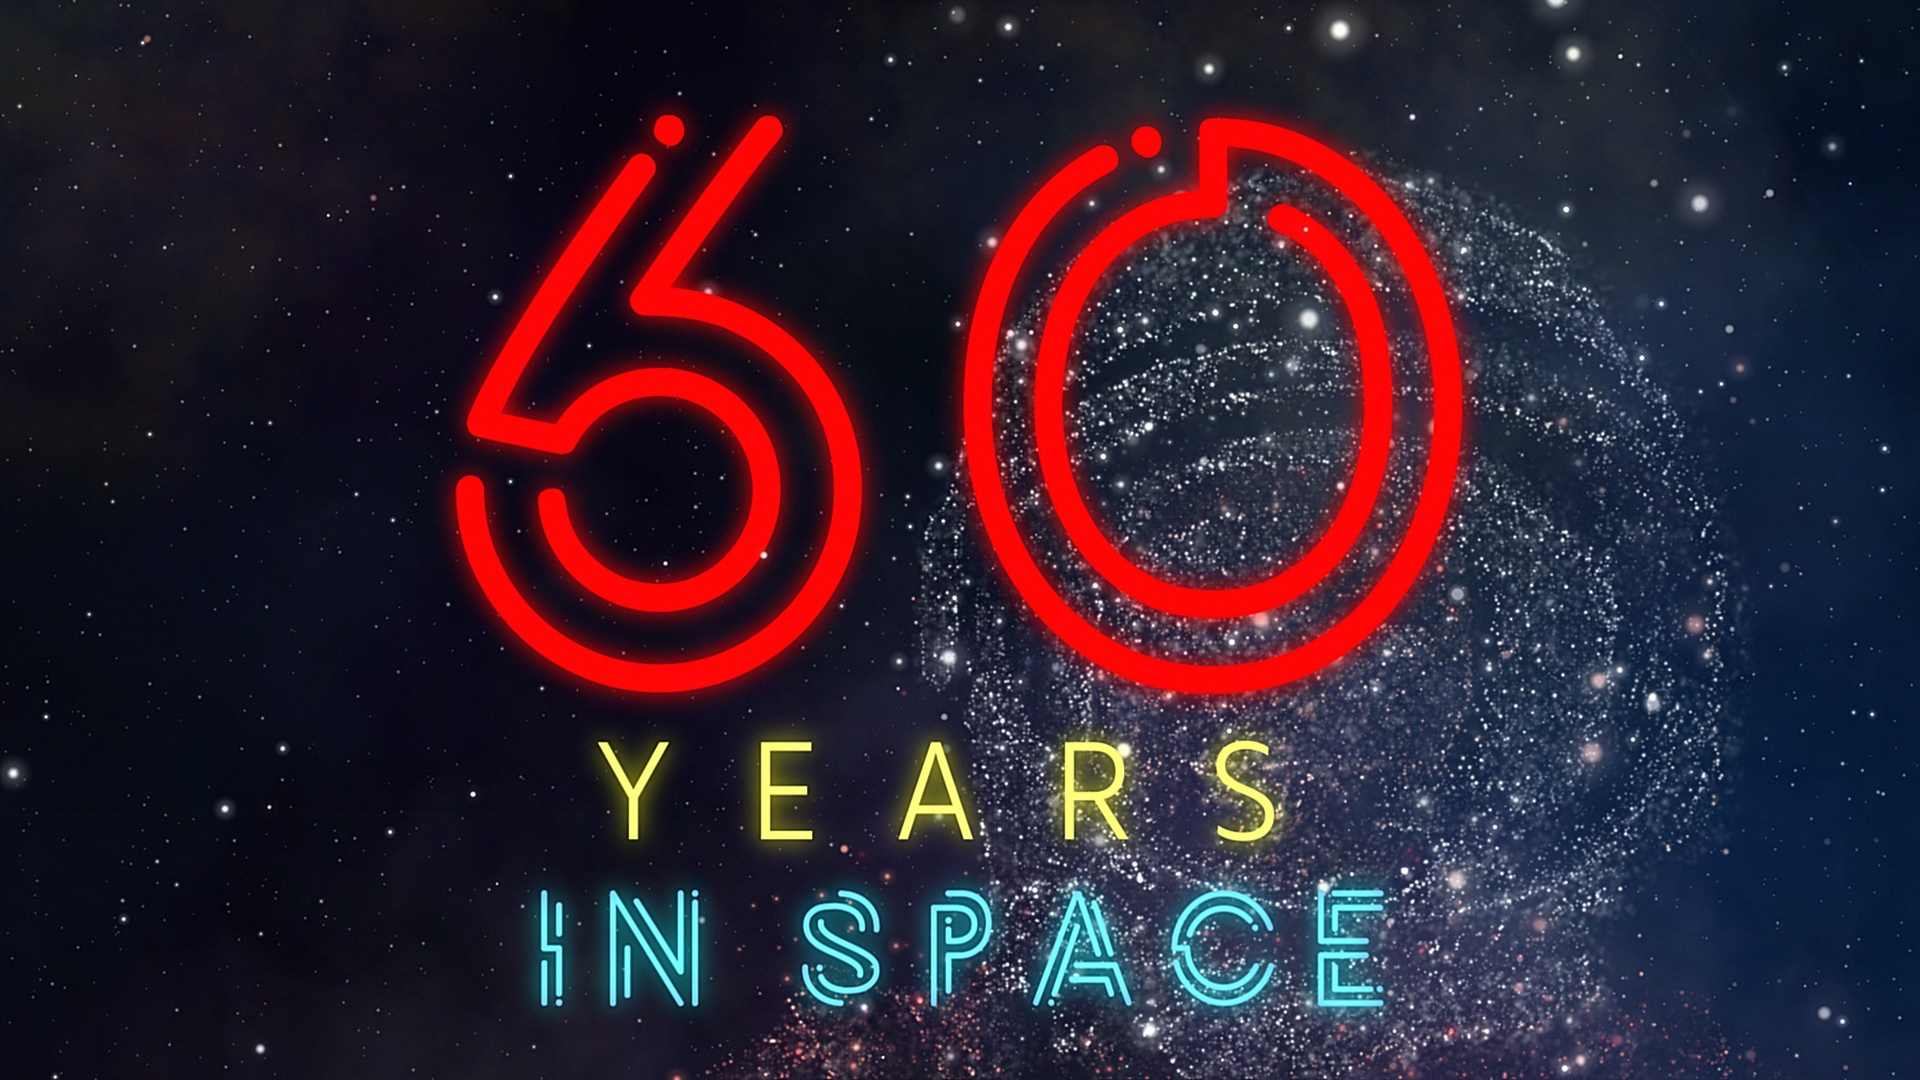 60 Years in Space